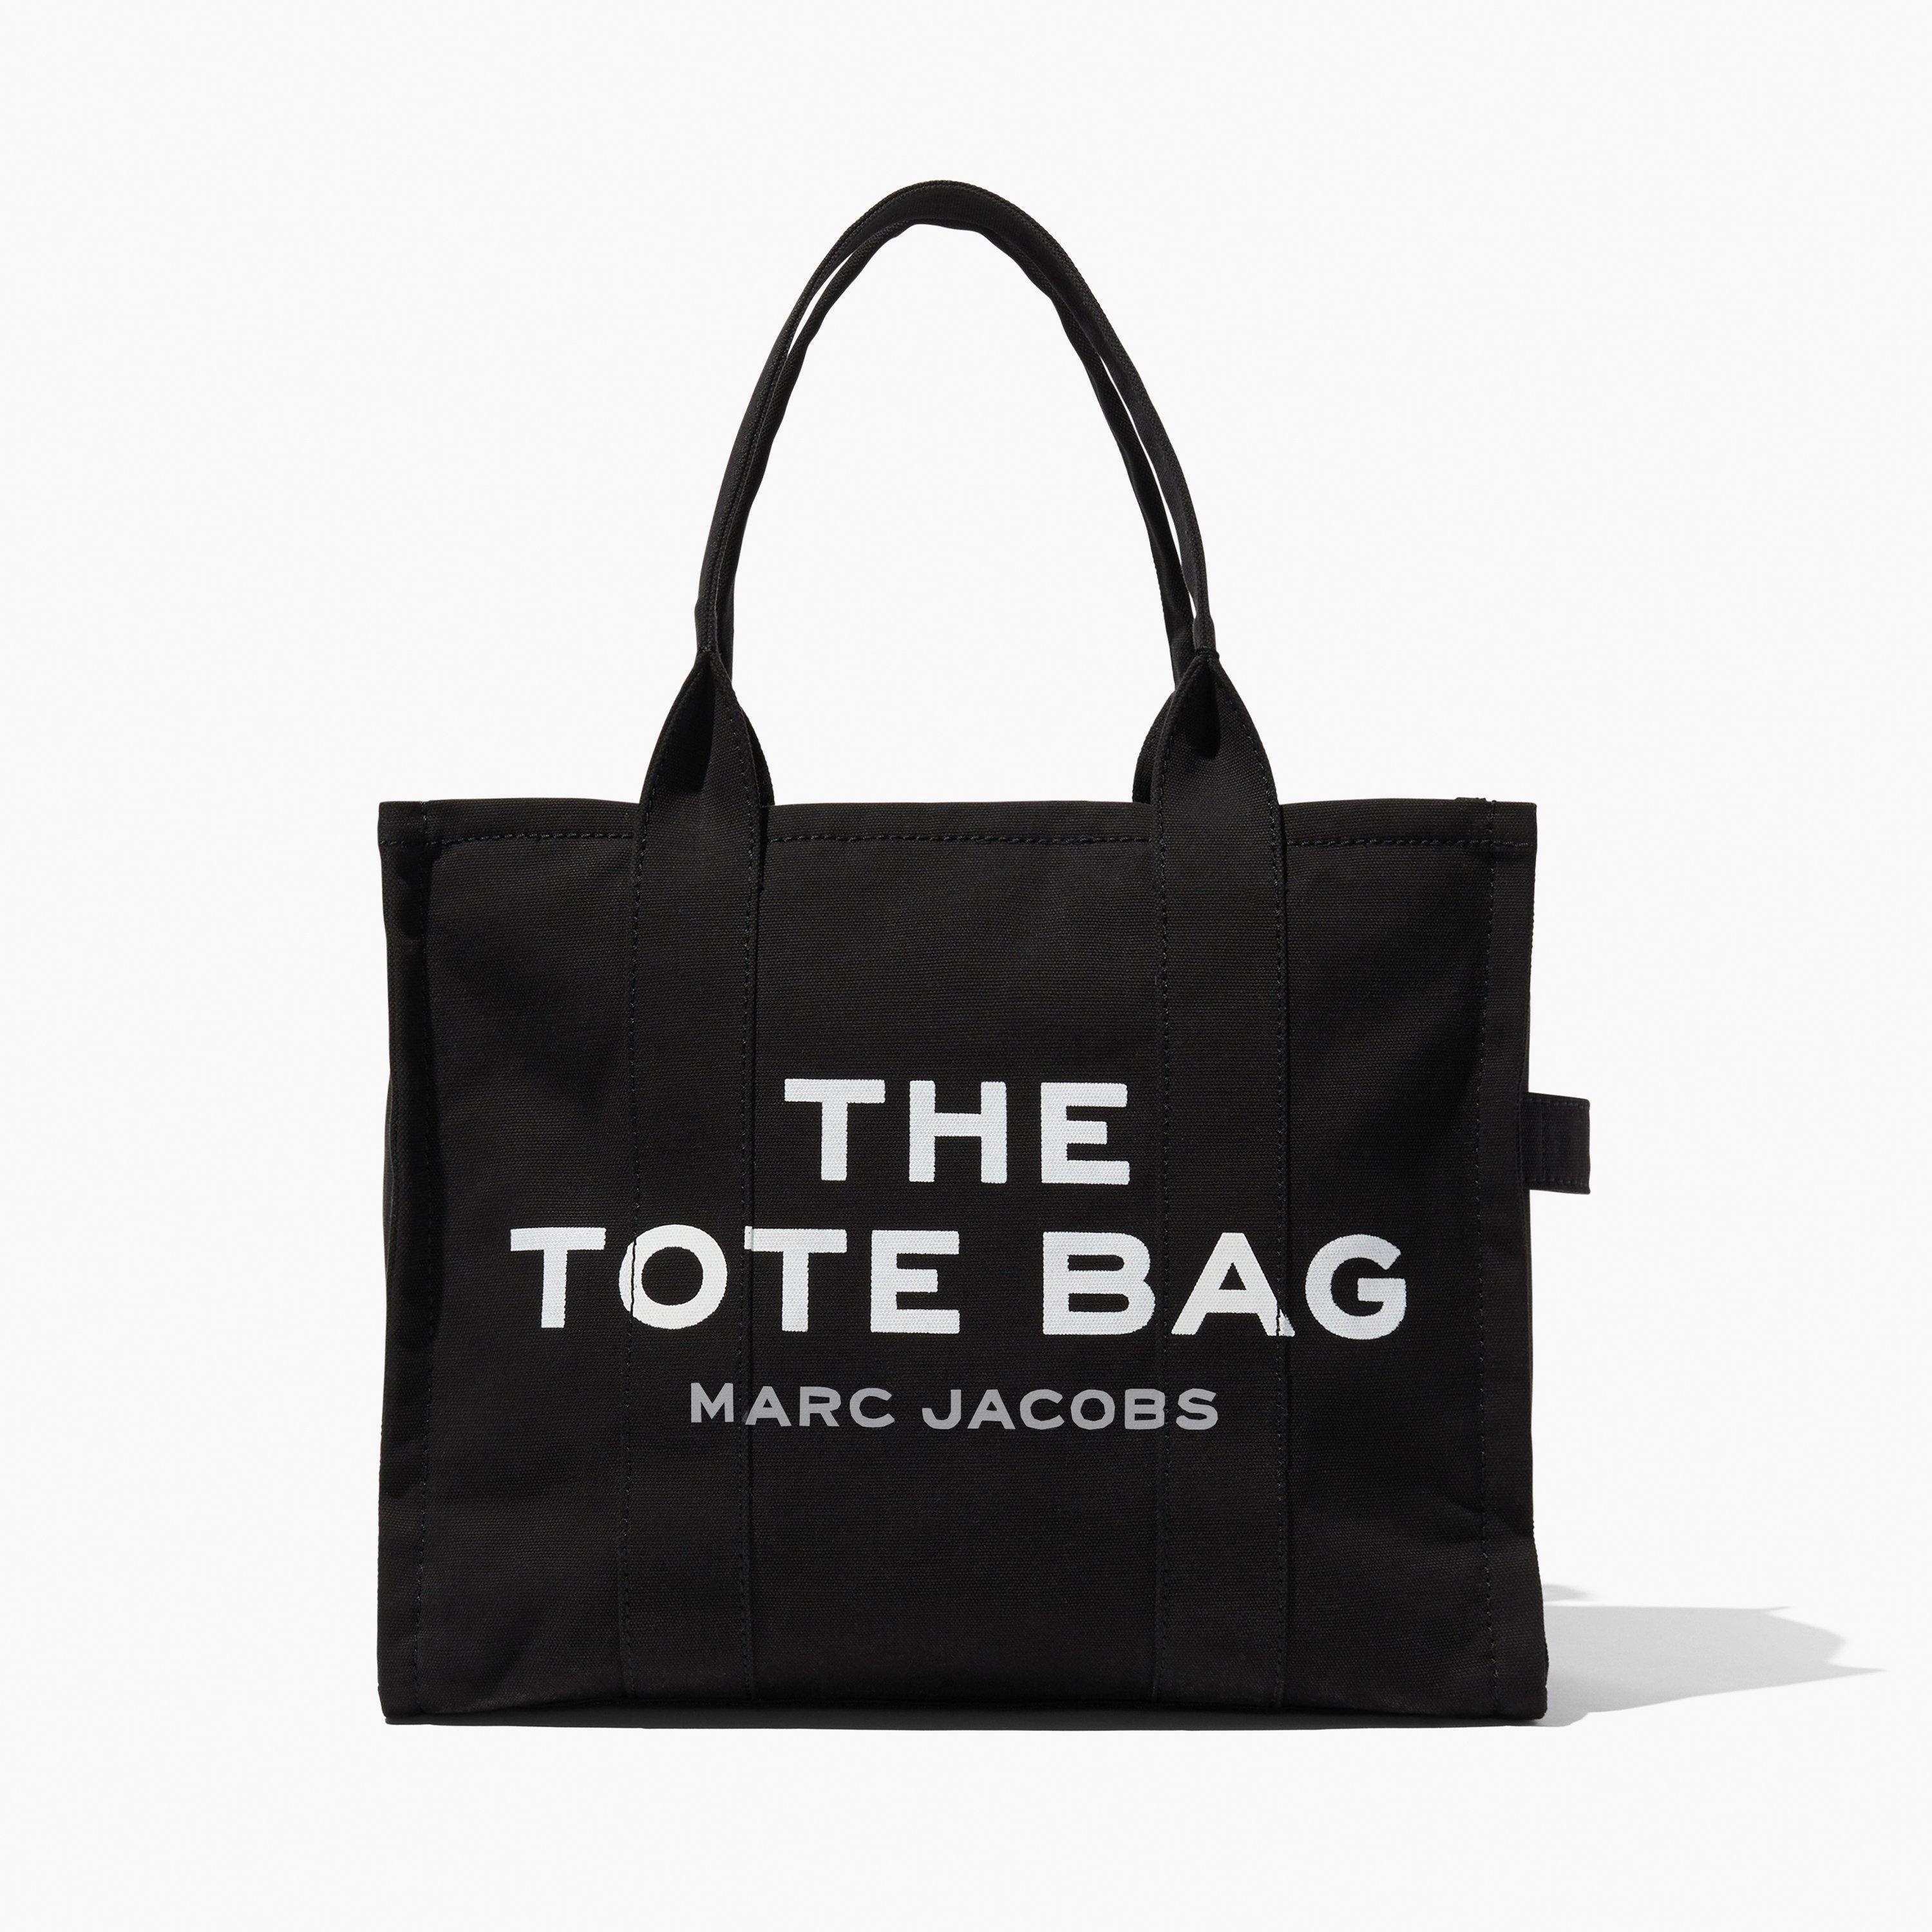 THE LARGE TOTE BAG - 1